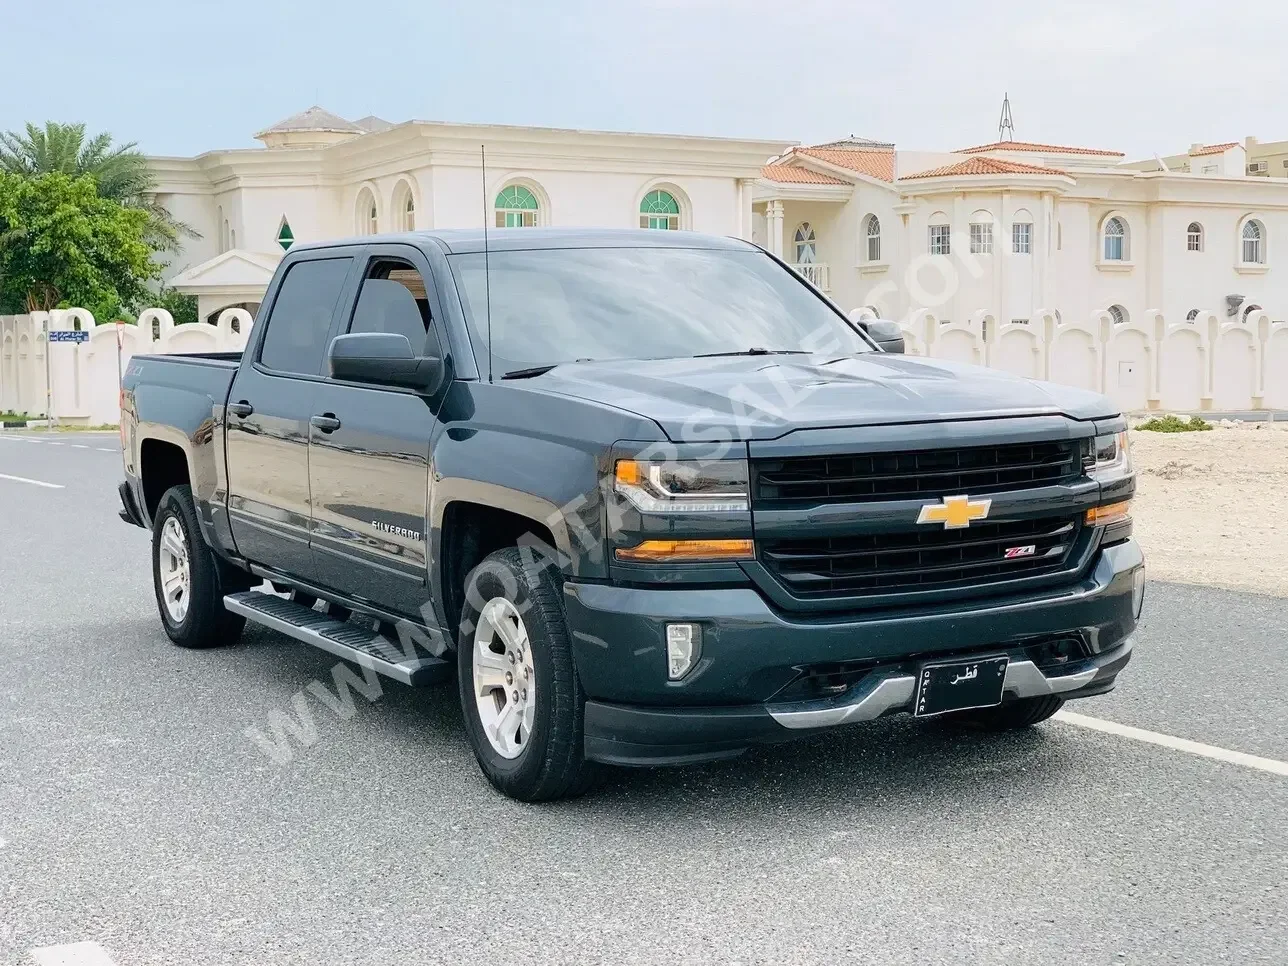 Chevrolet  Silverado  2018  Automatic  114,000 Km  8 Cylinder  Four Wheel Drive (4WD)  Pick Up  Gray